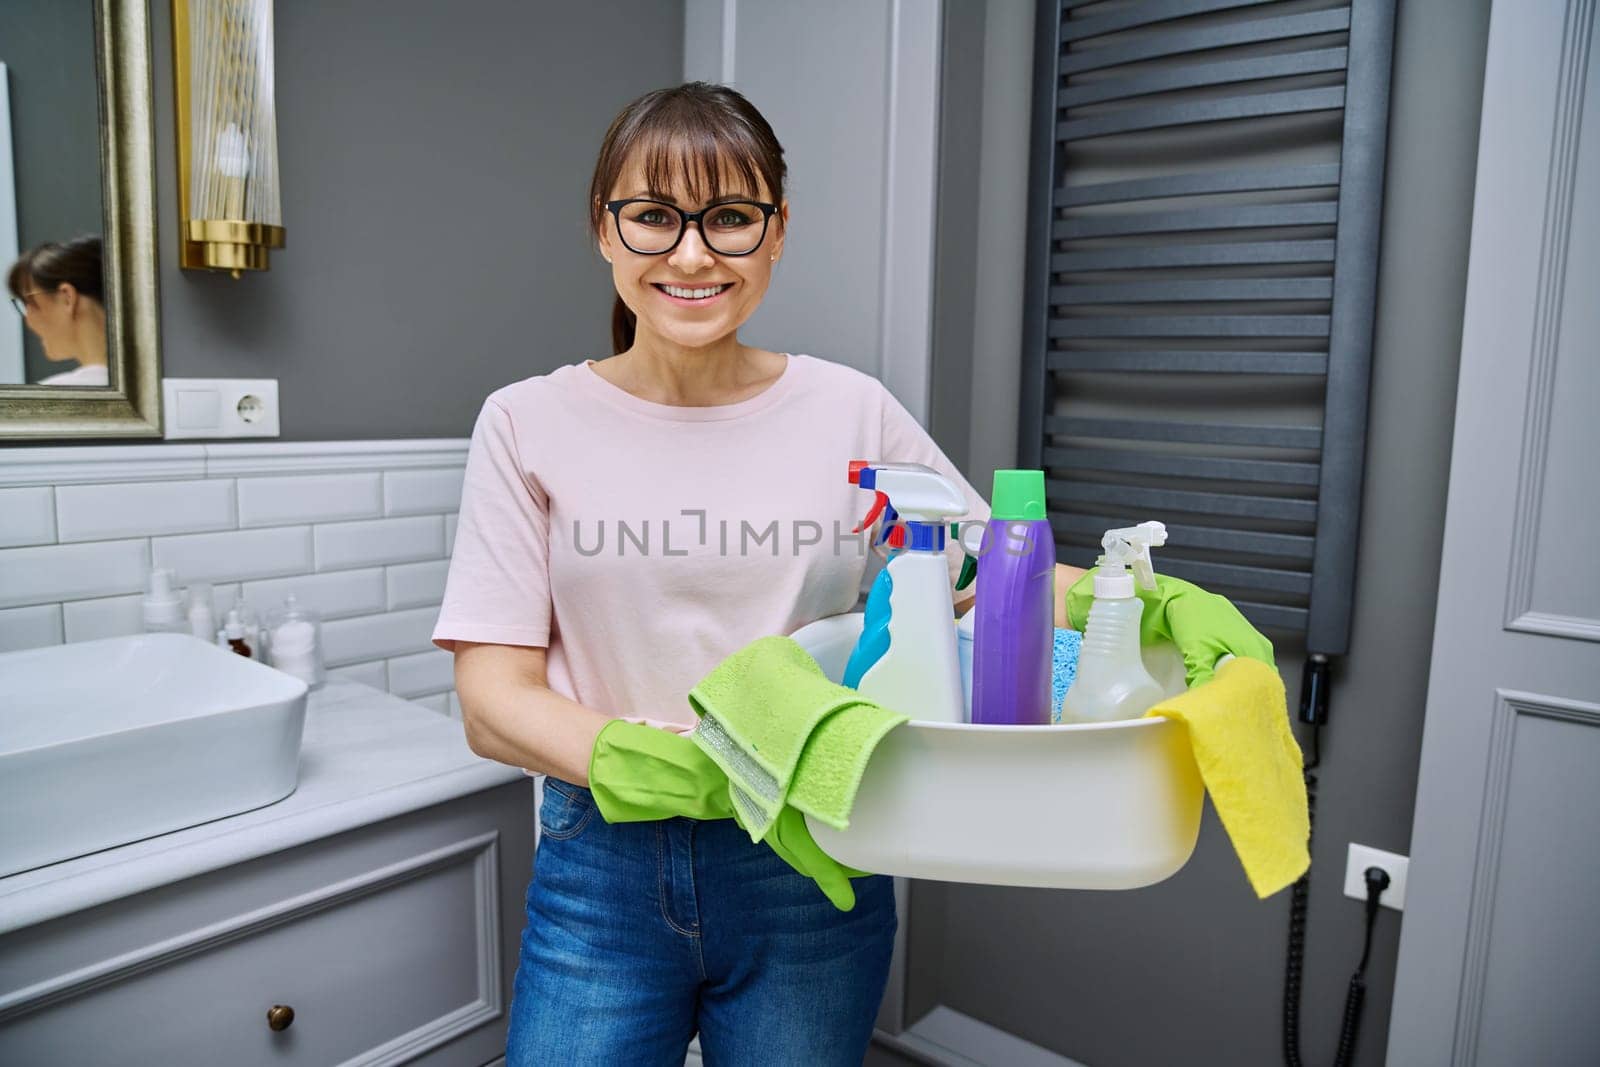 Middle-aged woman in gloves with basin of detergents in bathroom. Female preparing for routine house cleaning, housecleaning service worker posing at workplace. Housekeeping housework cleaning concept